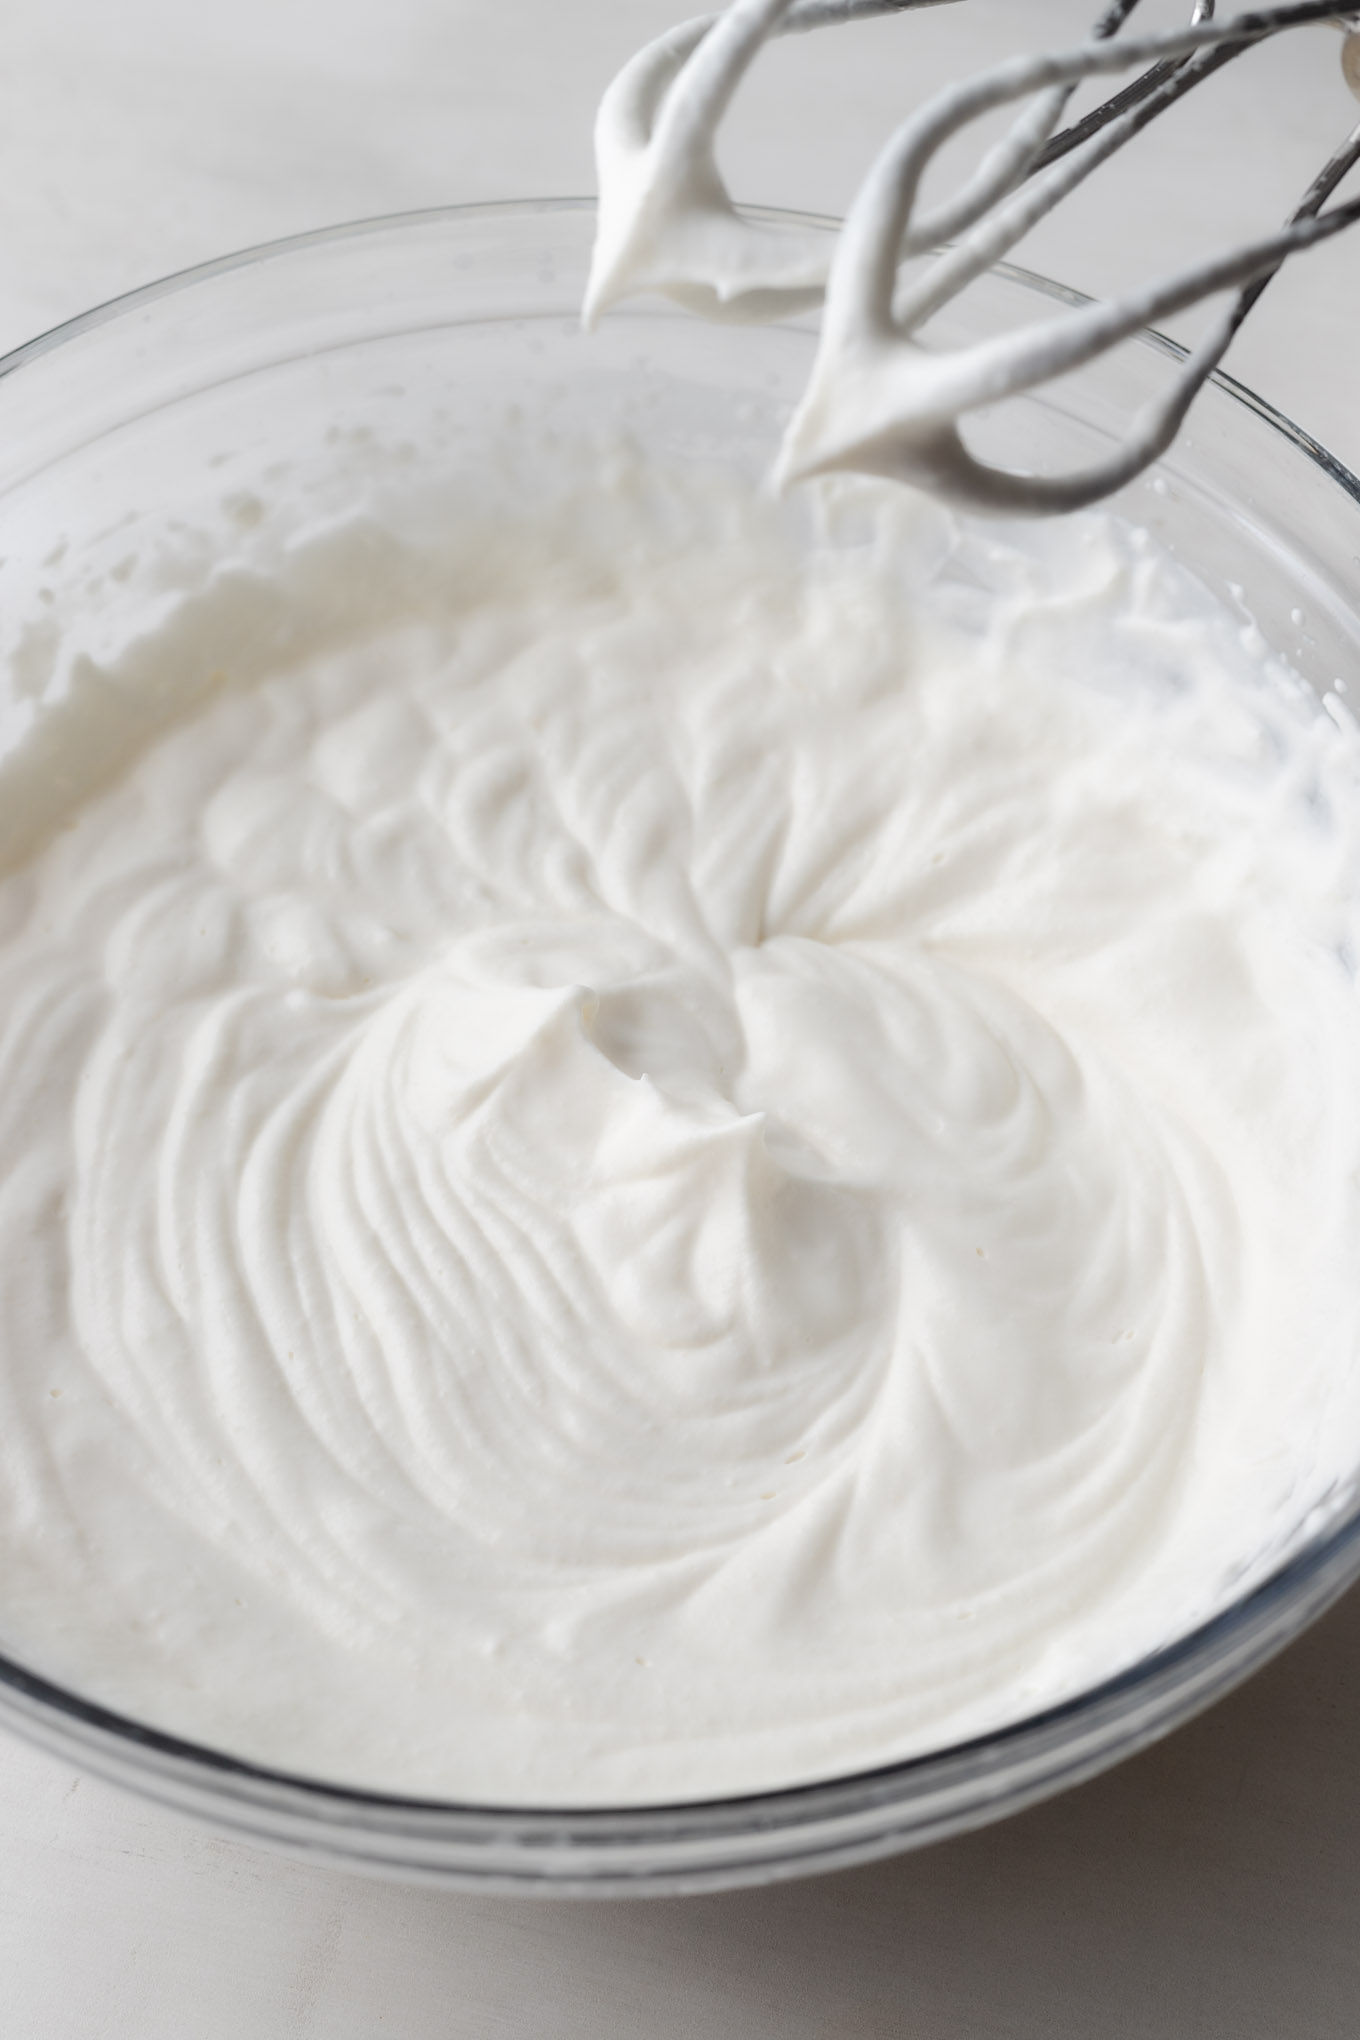 An overhead view of whipped cream beaten to stiff peaks.